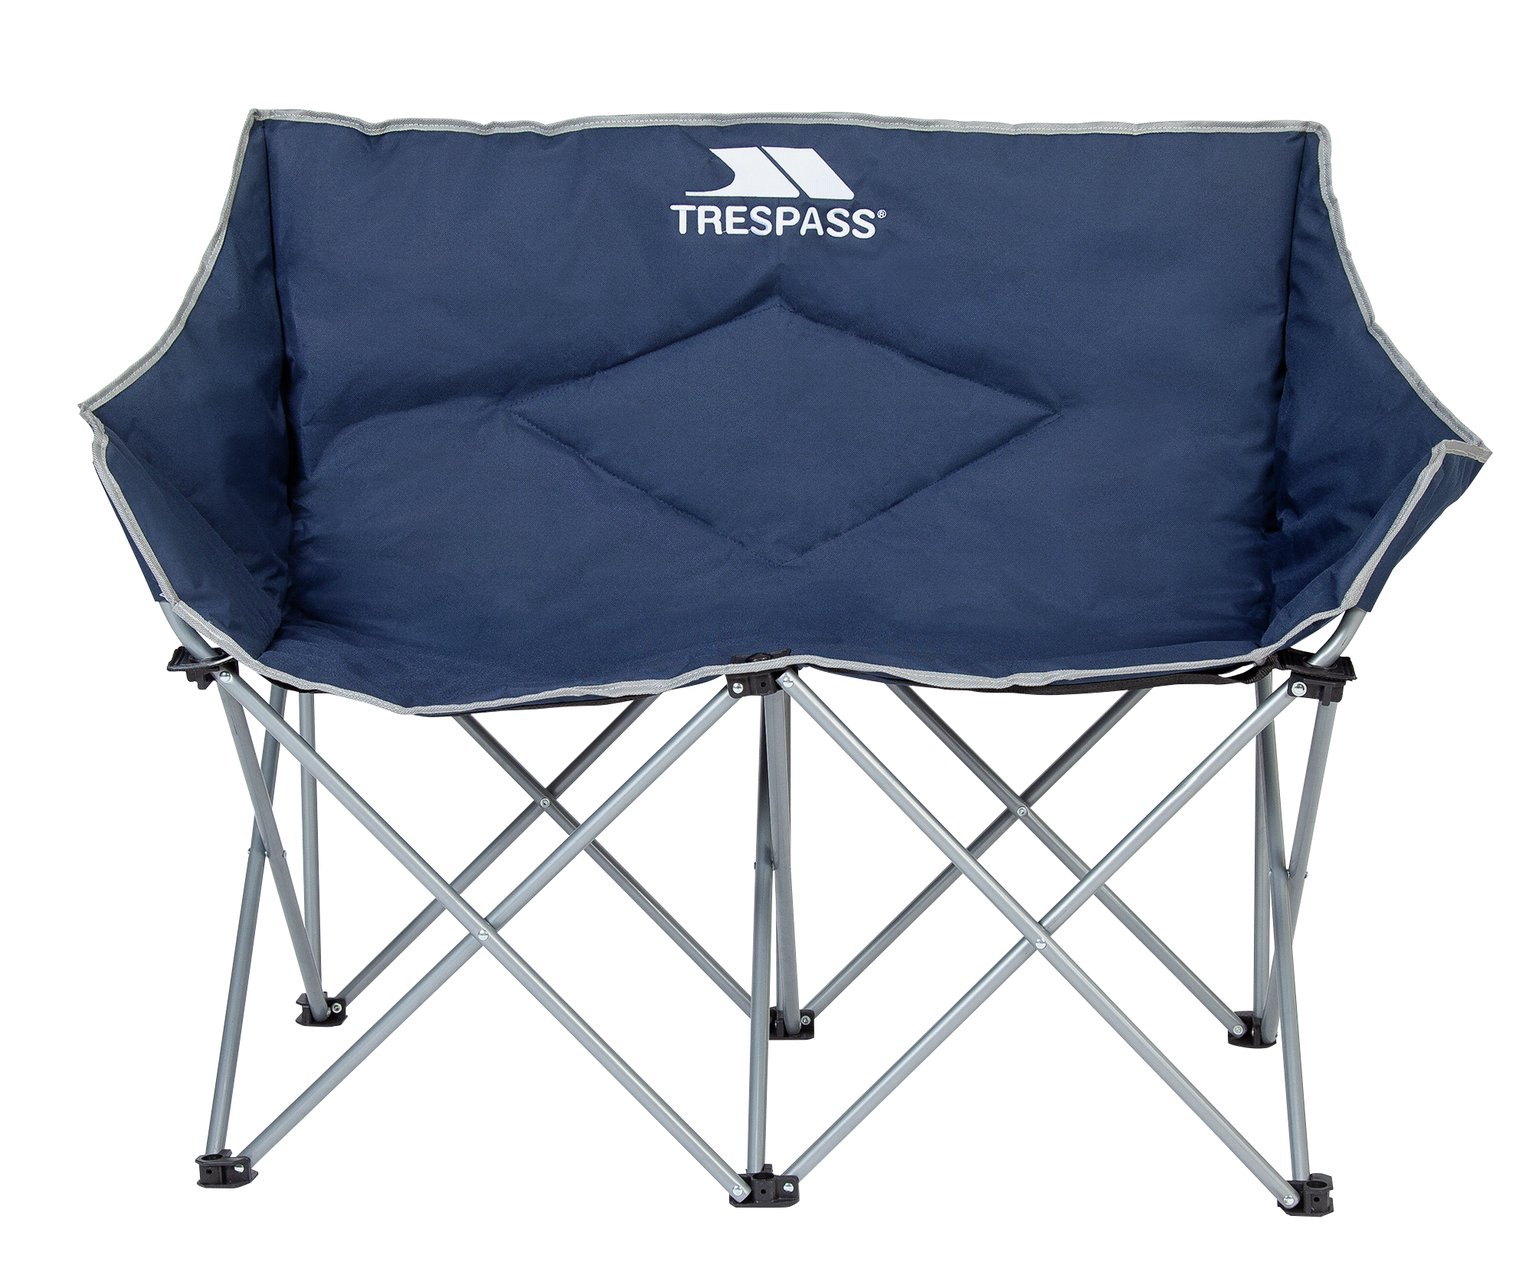 Trespass Double Seat Steel Frame Folding Chair with Carry Bag